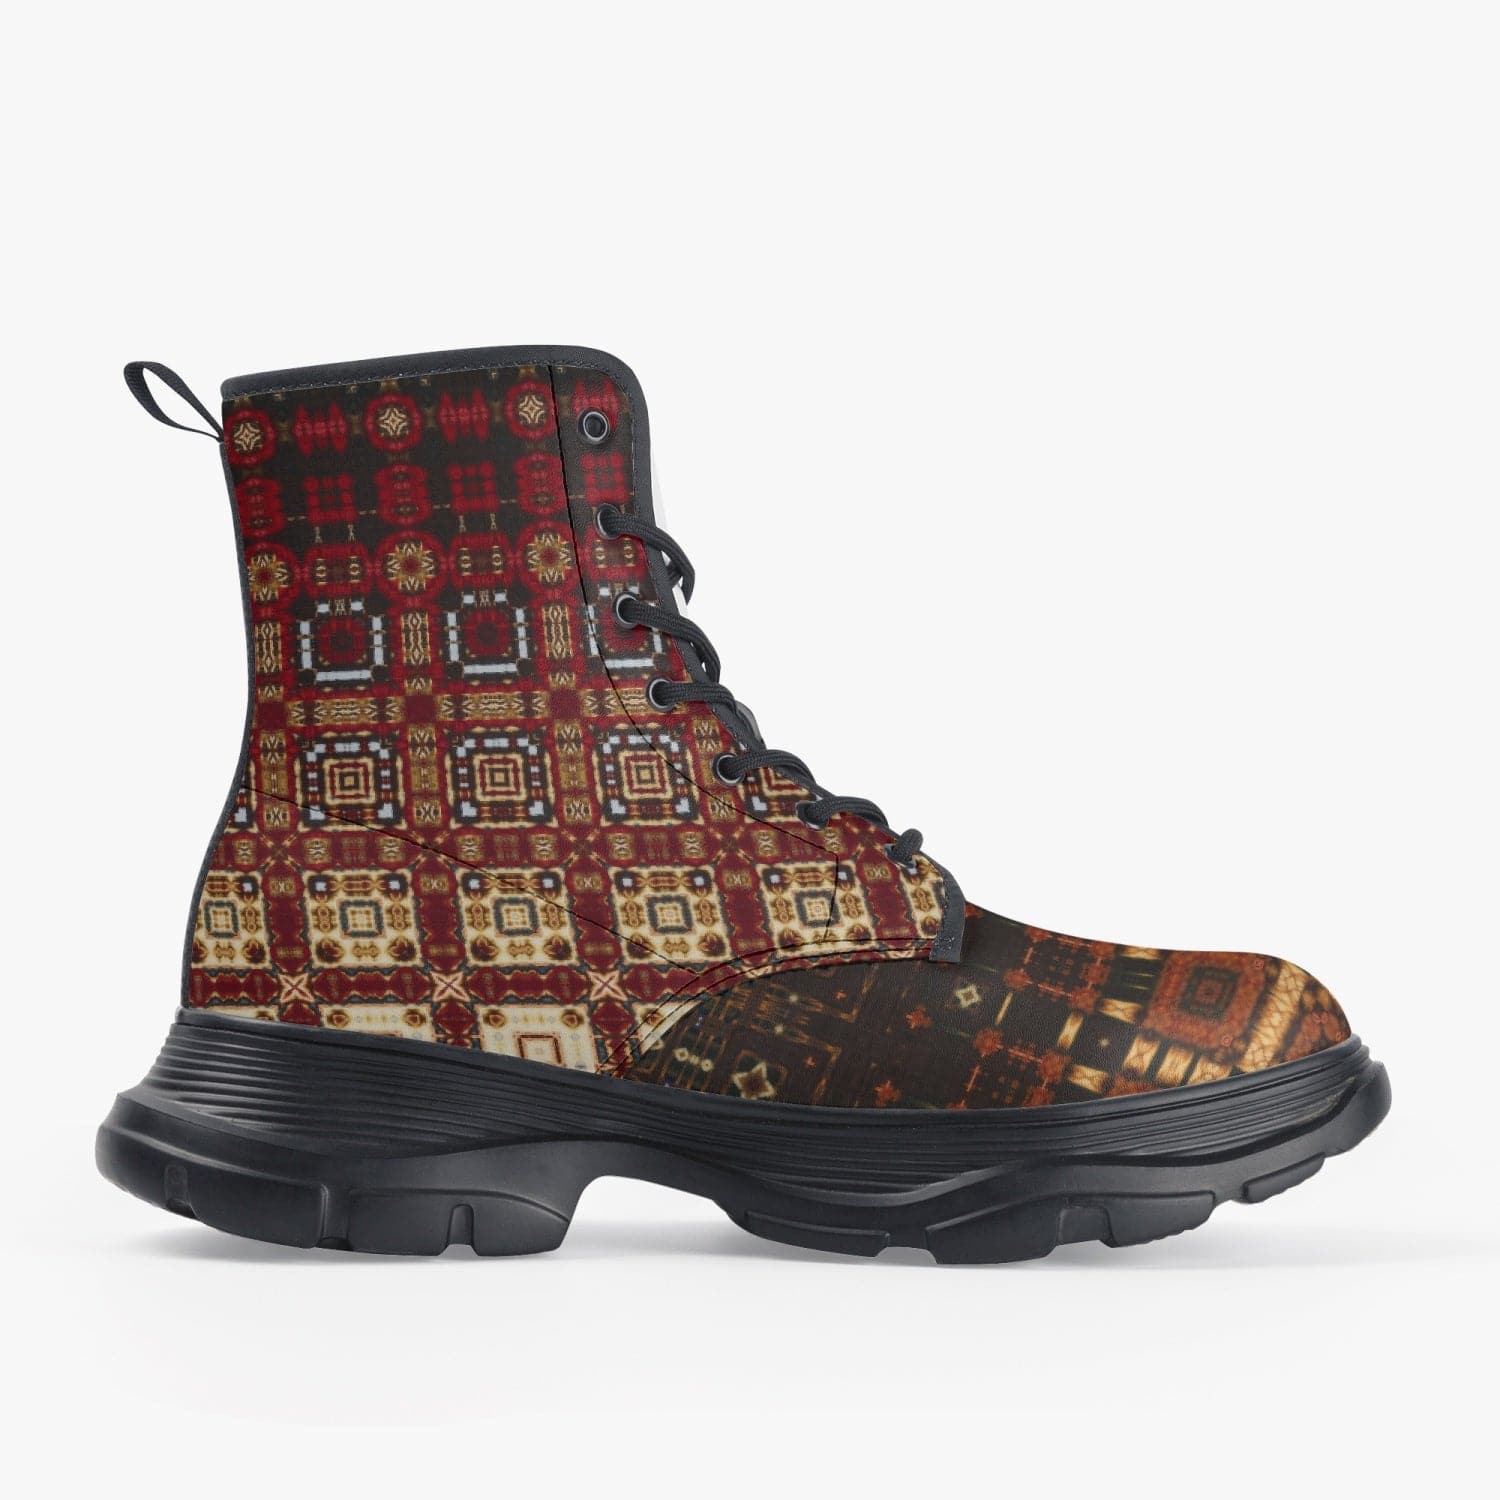 Orange and brown patterned exclusive designed Casual Leather Chunky Boots, by Sensus Studio Design